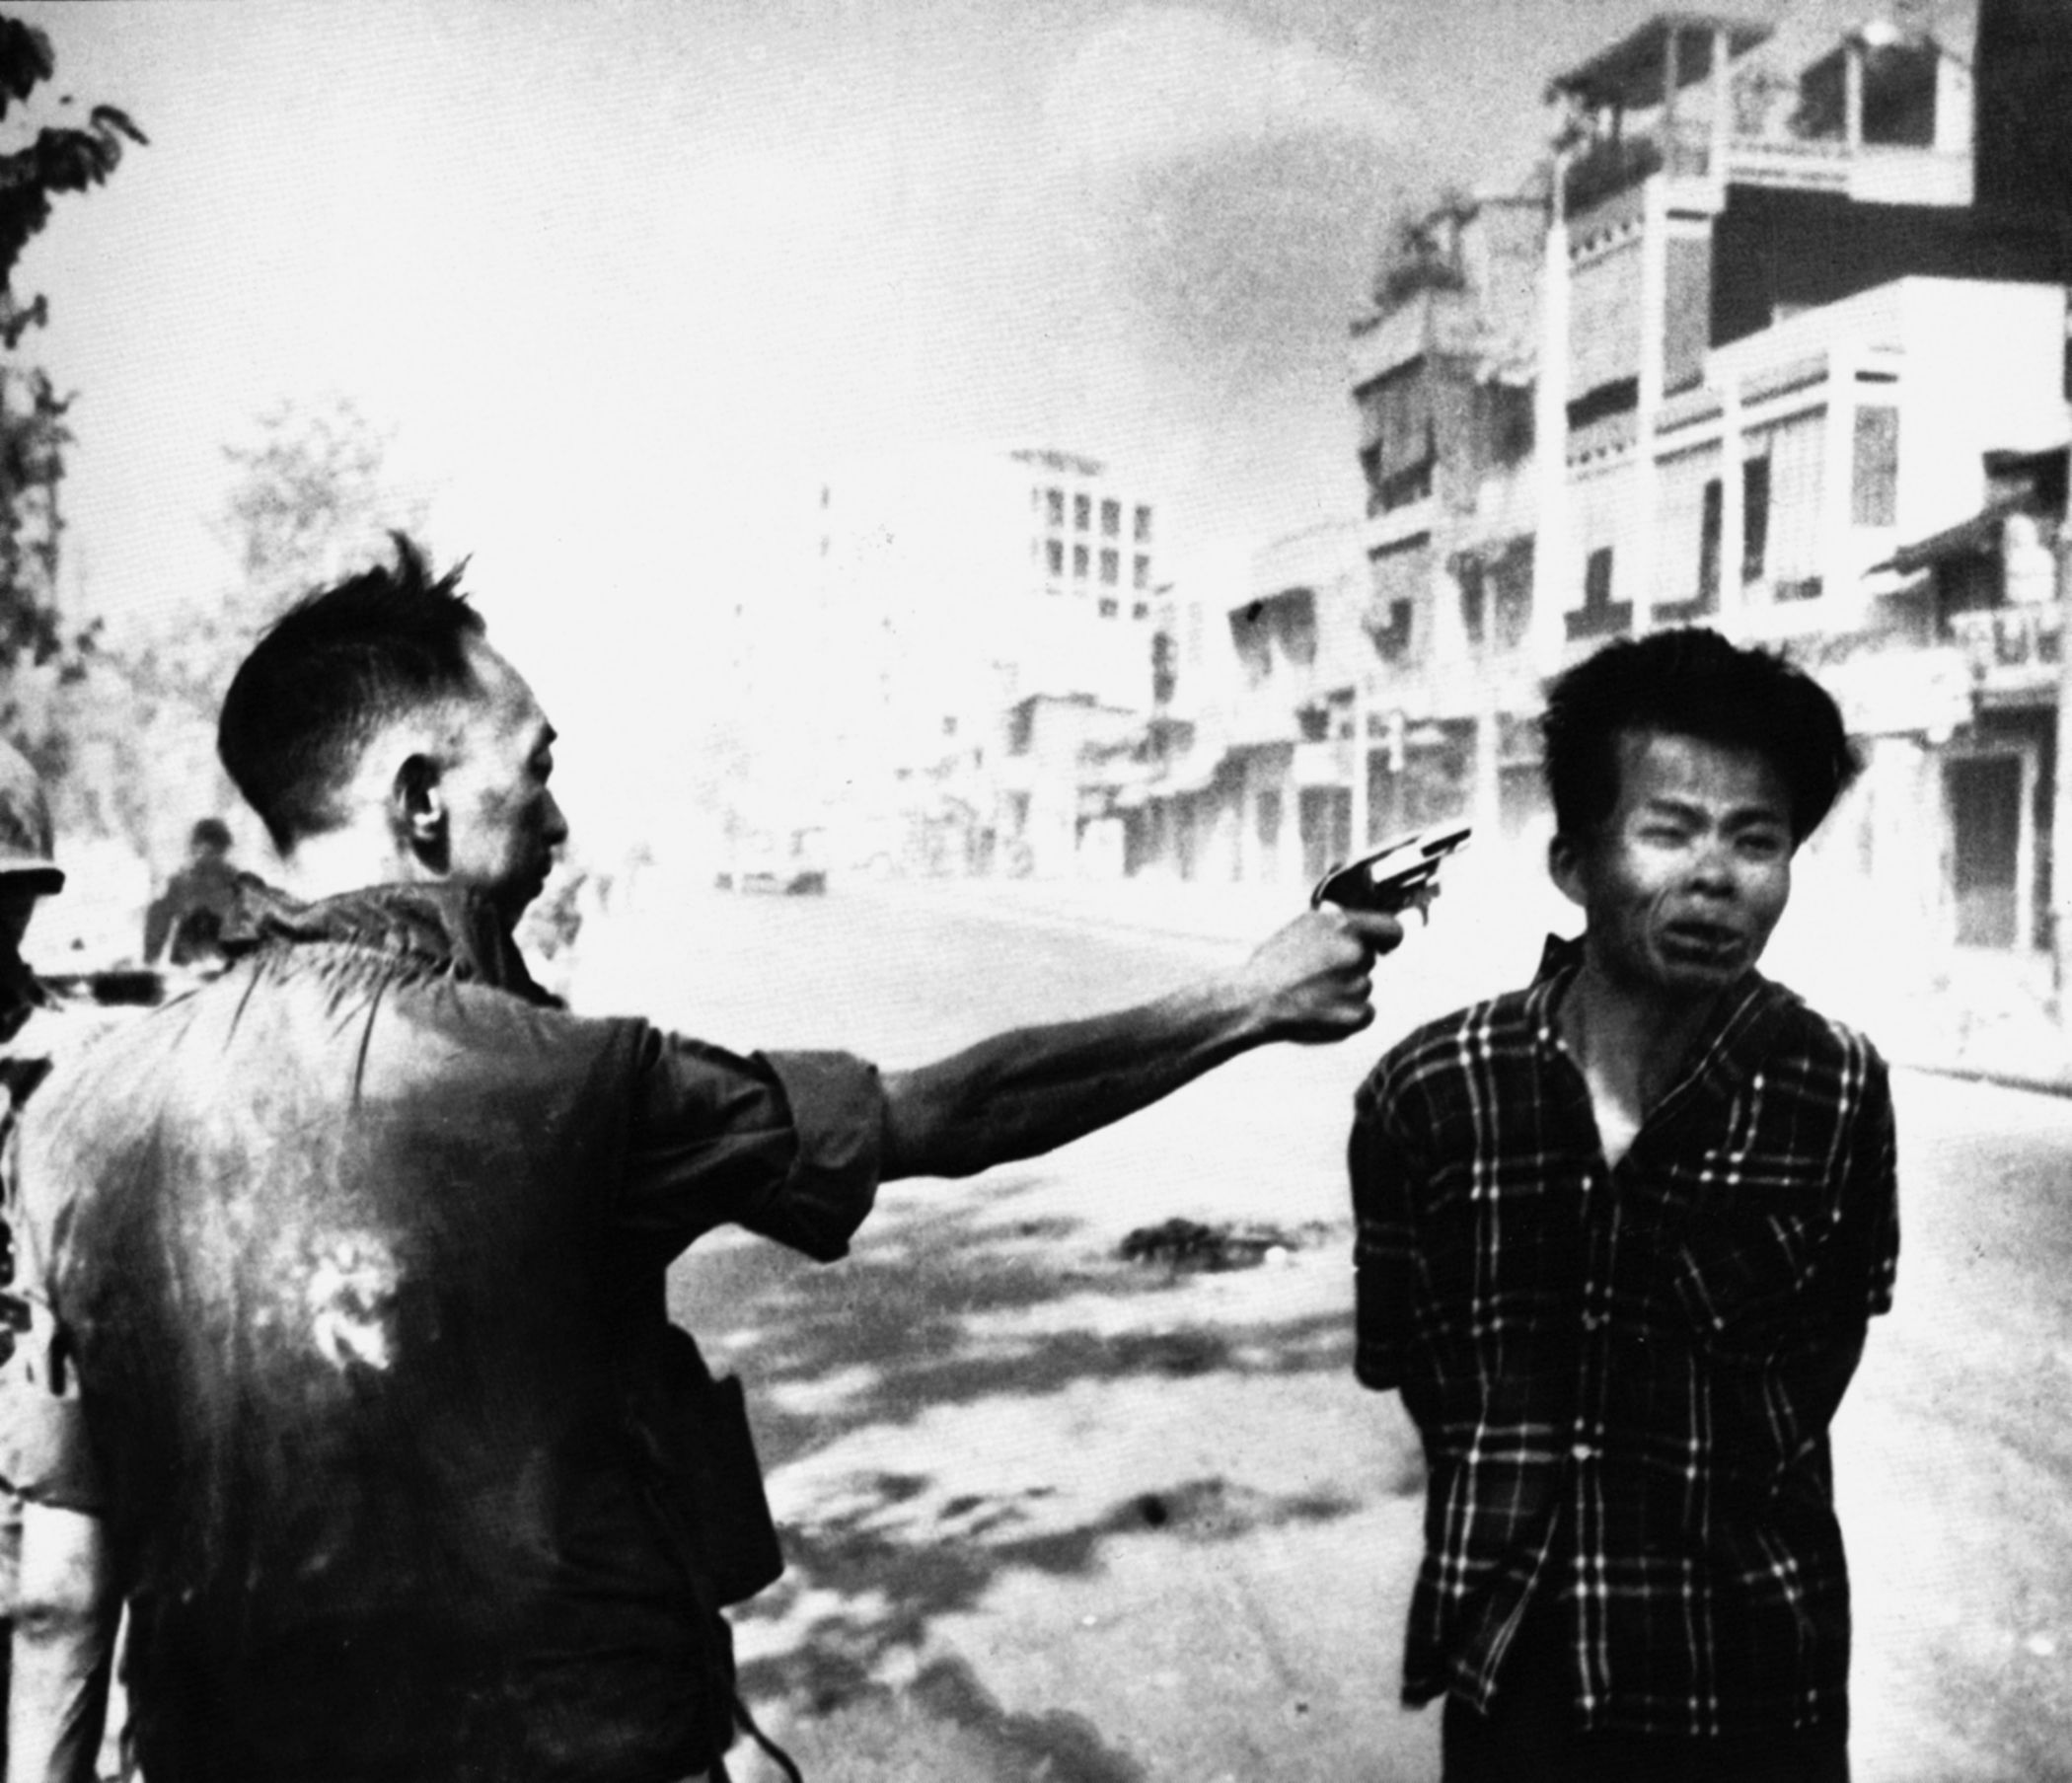 Eddie Adams’s Pulitzer Prize winning photograph, depicting the horrifying execution of a Viet Cong officer by Brig. Gen. Nguyen Ngoc Loan during the Tet offensive, helped turn the American public against the Vietnam war.